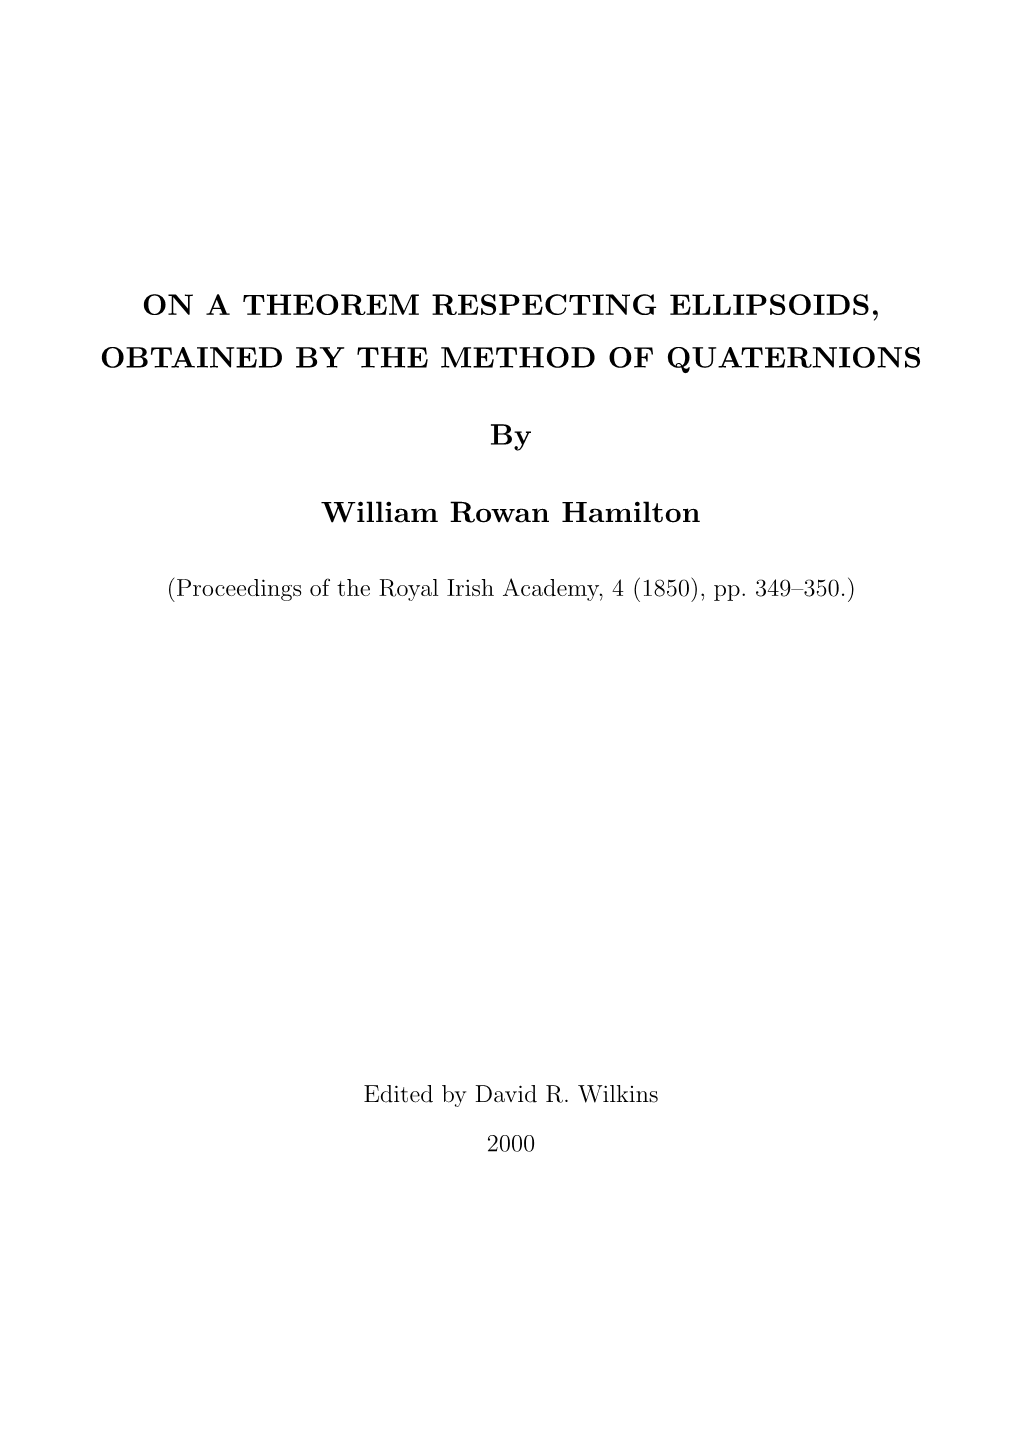 On a Theorem Respecting Ellipsoids, Obtained by the Method of Quaternions